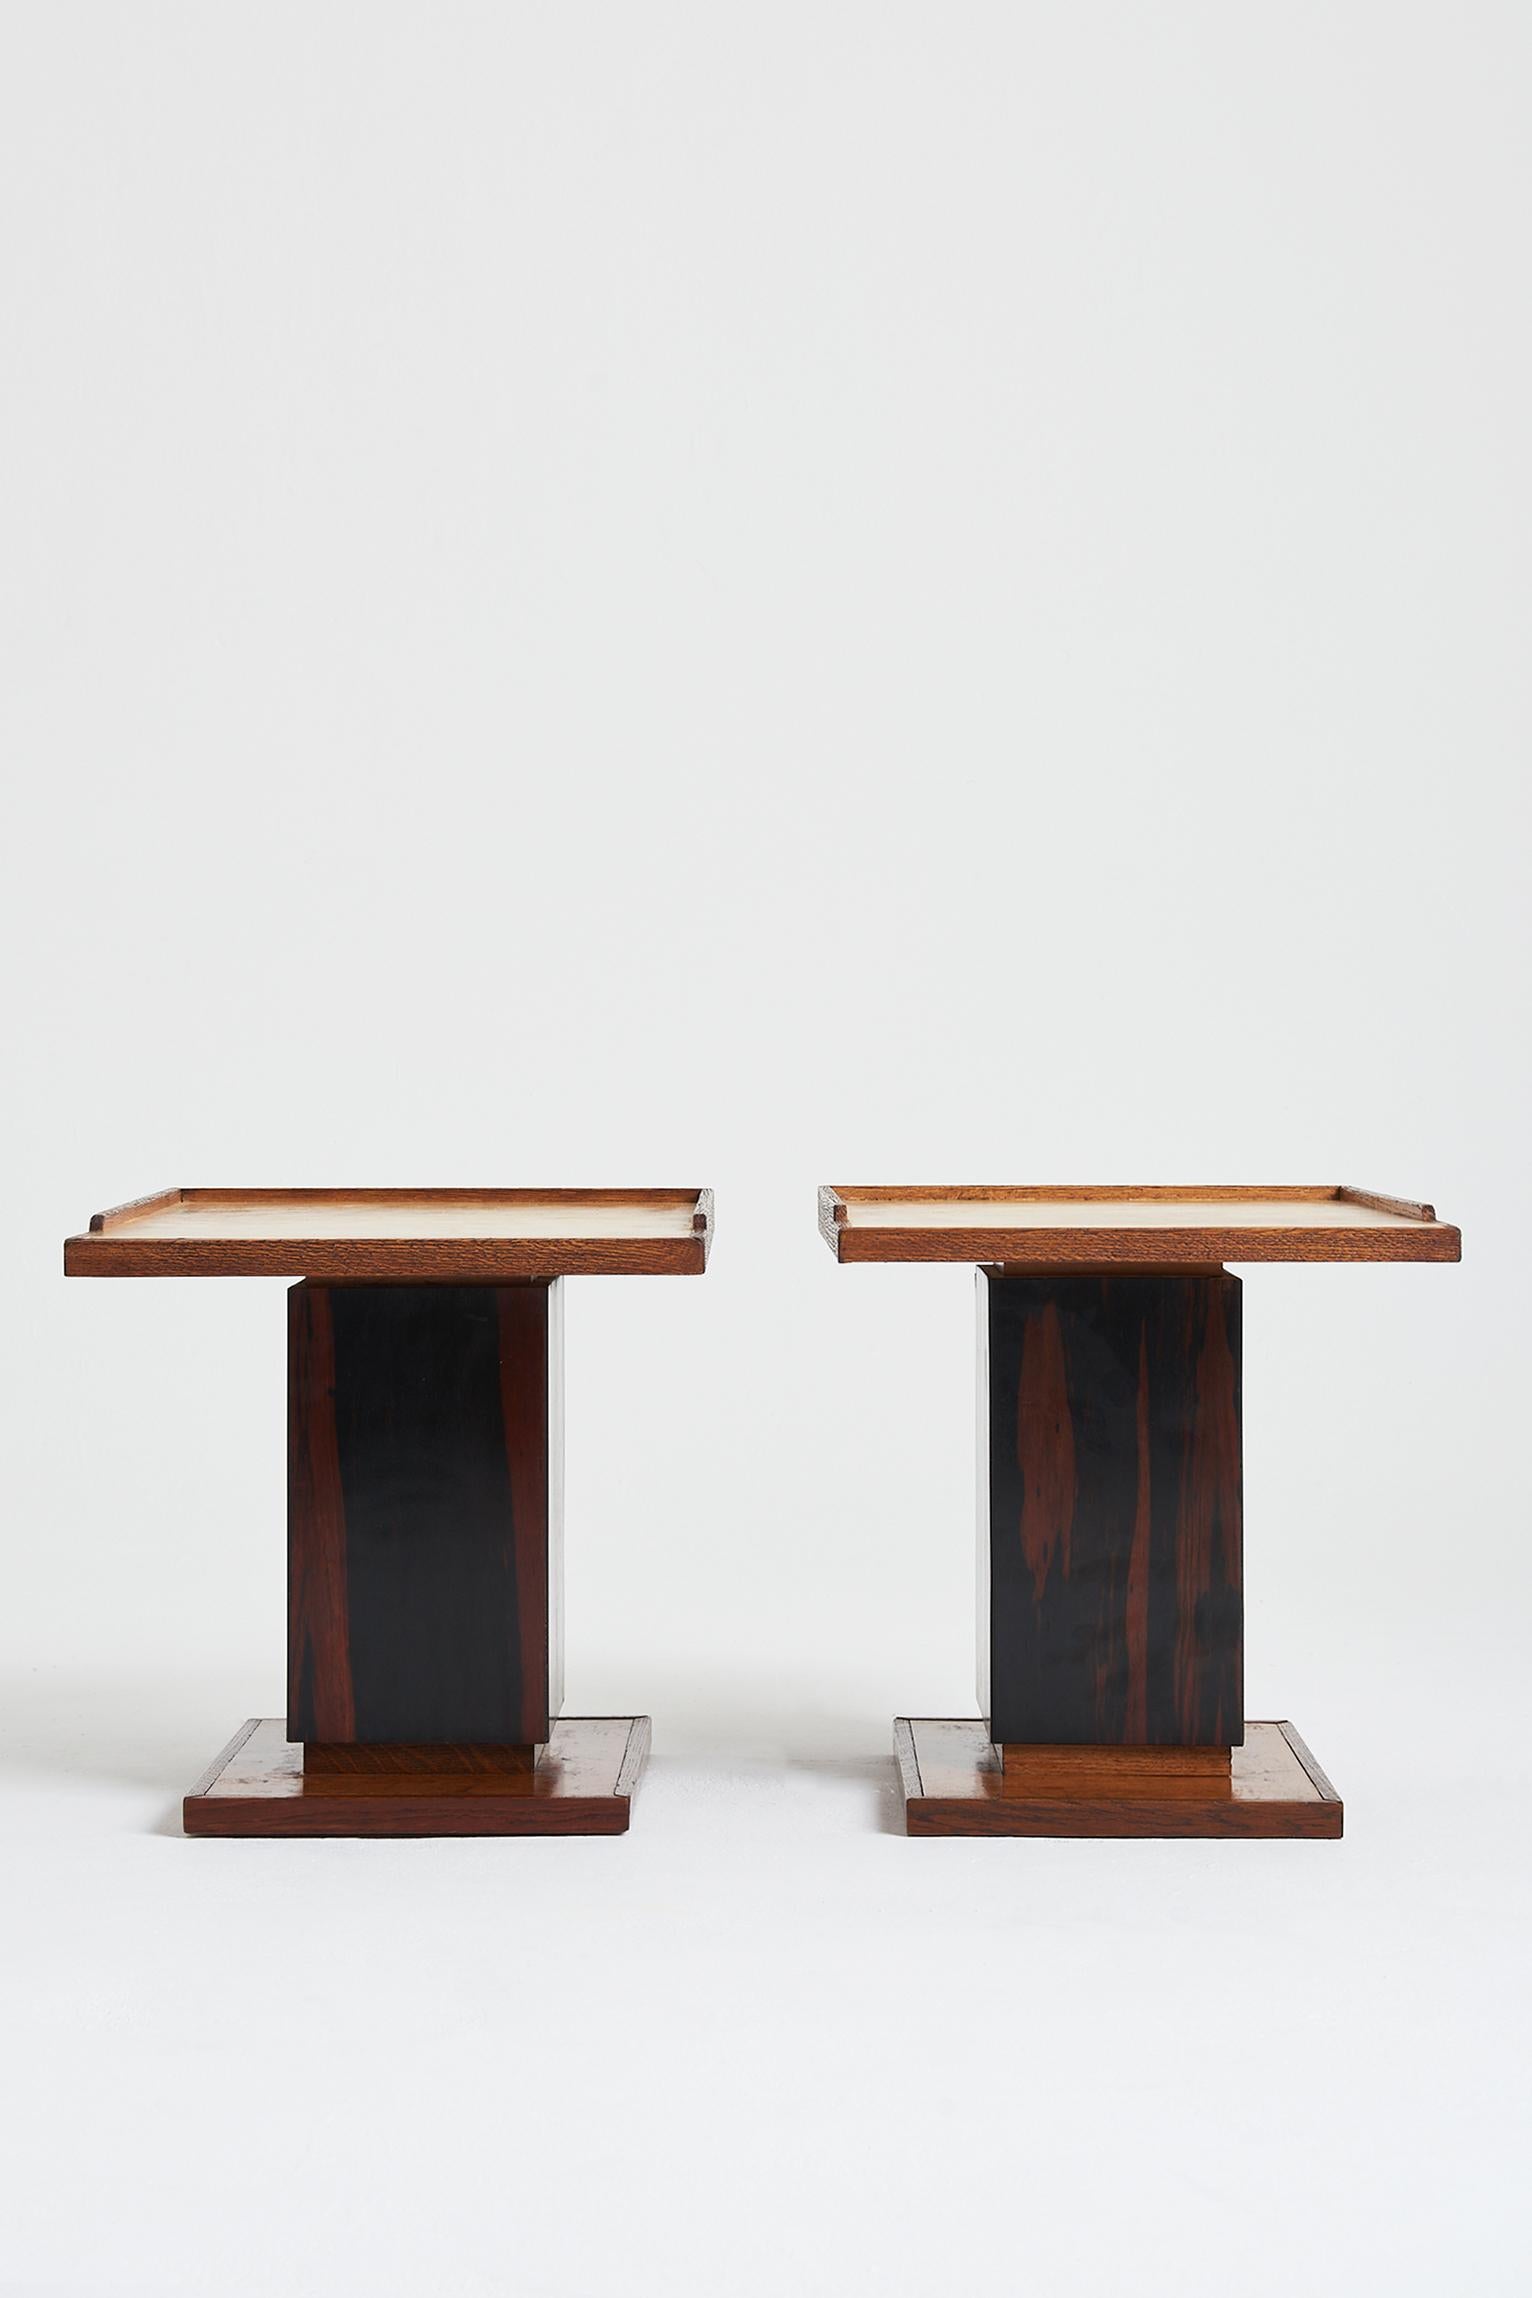 Leather Pair of Velum Side Tables in the manner of Paul-Dupré Lafon